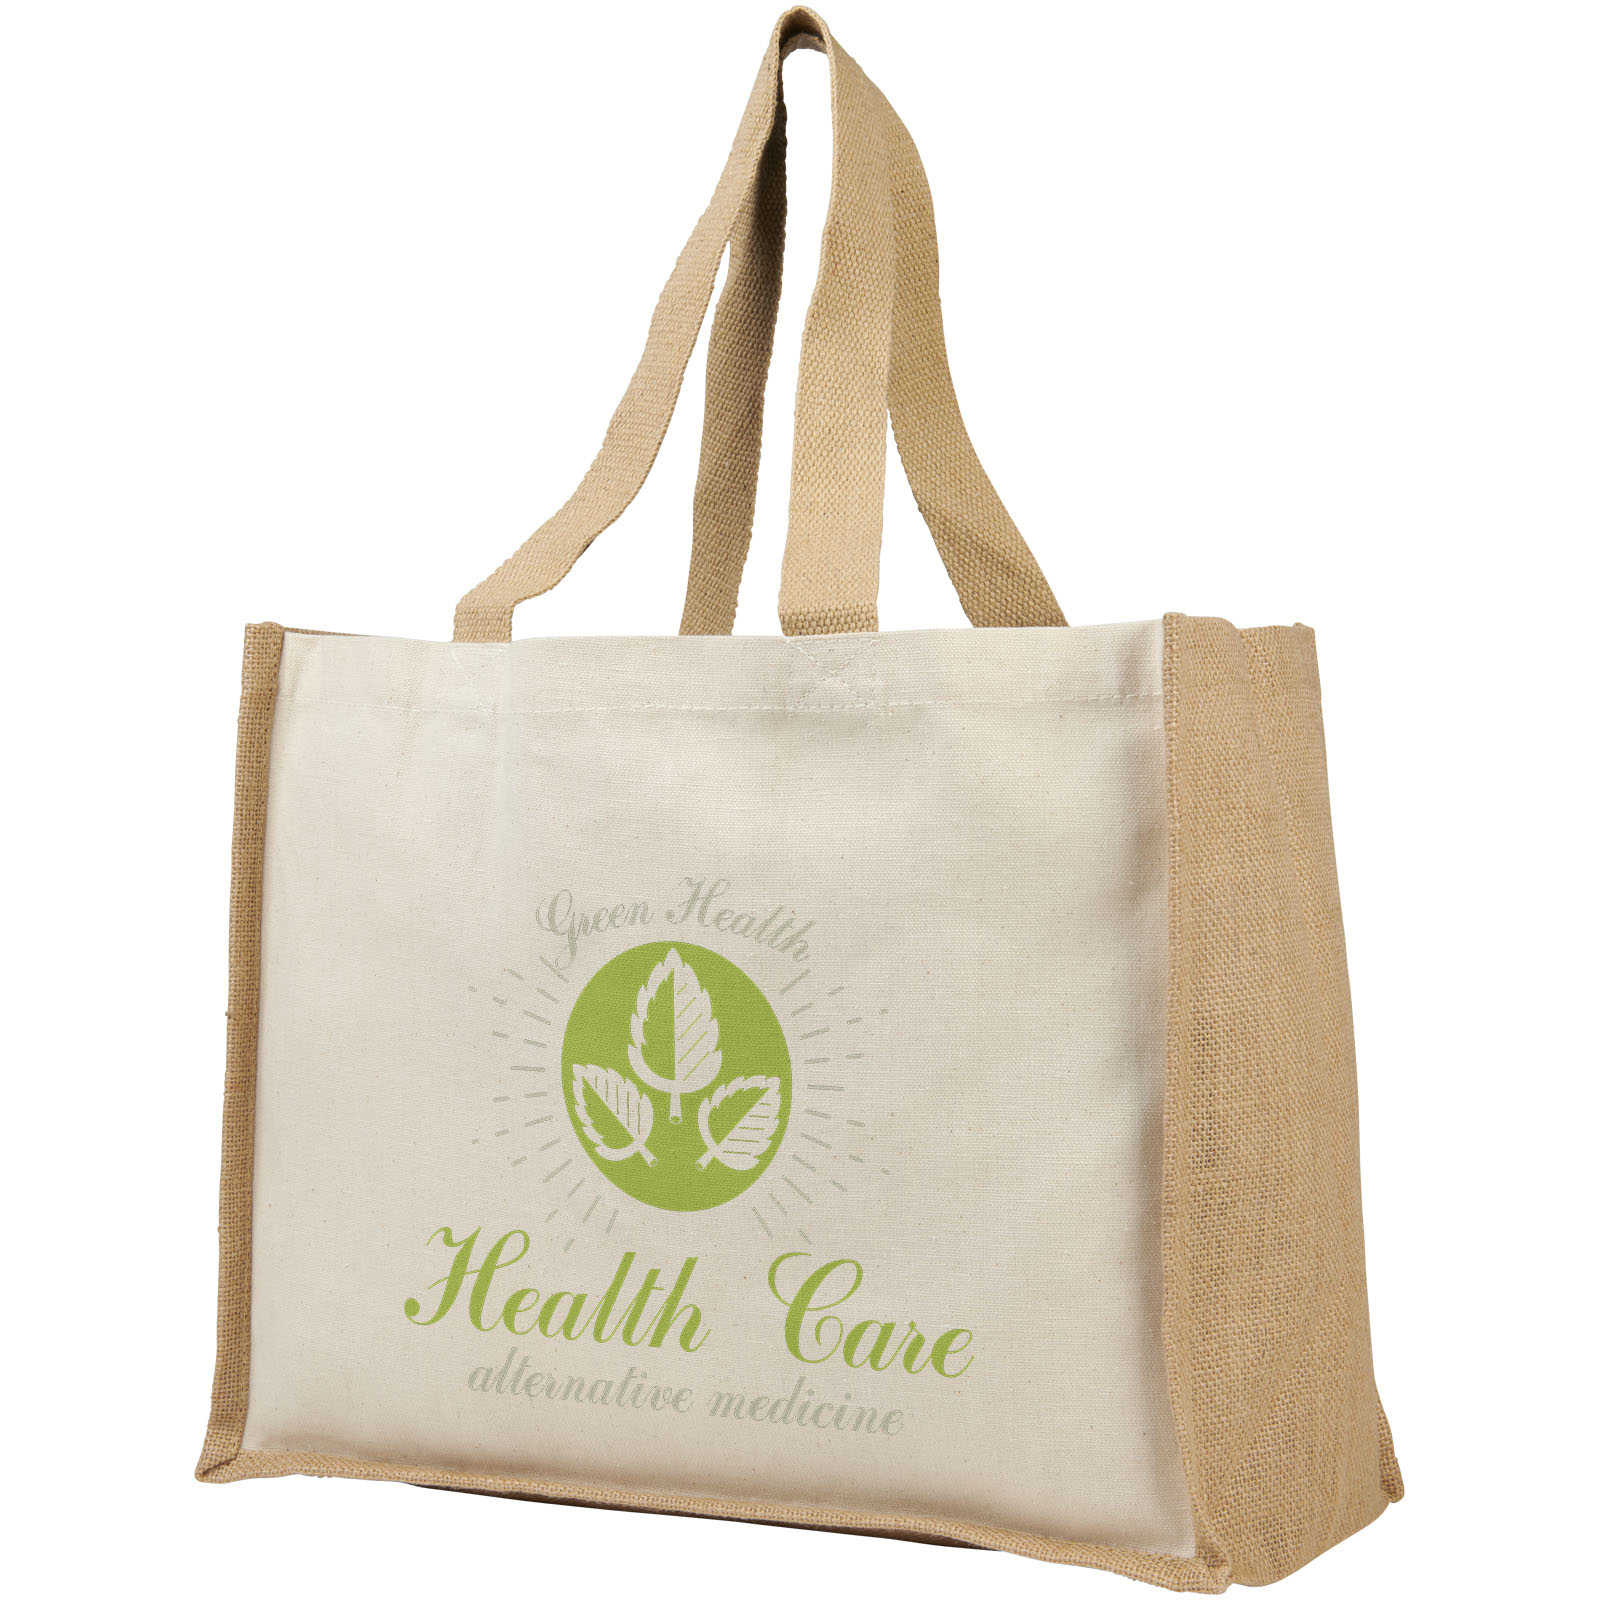 image of a jute shopper with green print to one side of the bag